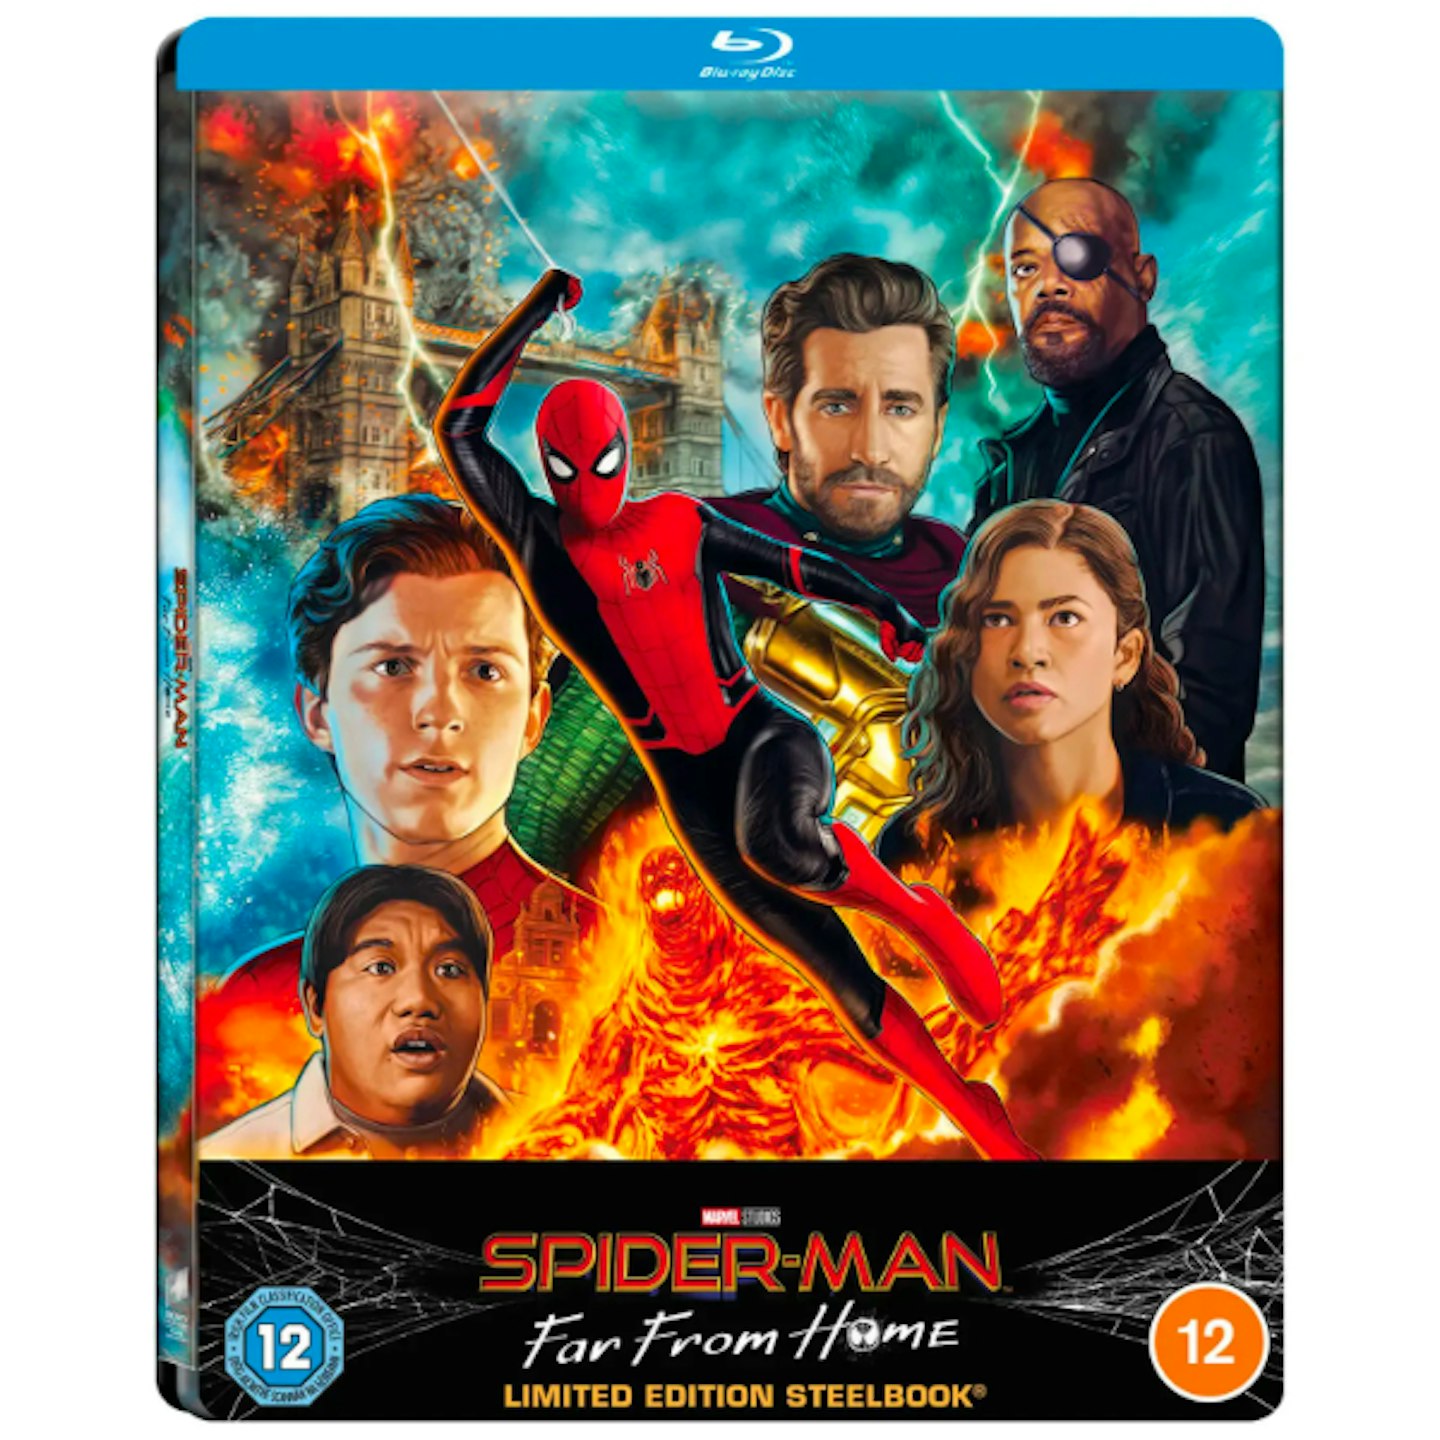 Spider-Man: Far From Home - Zavvi Exclusive Lenticular Steelbook (Includes Blu-ray)